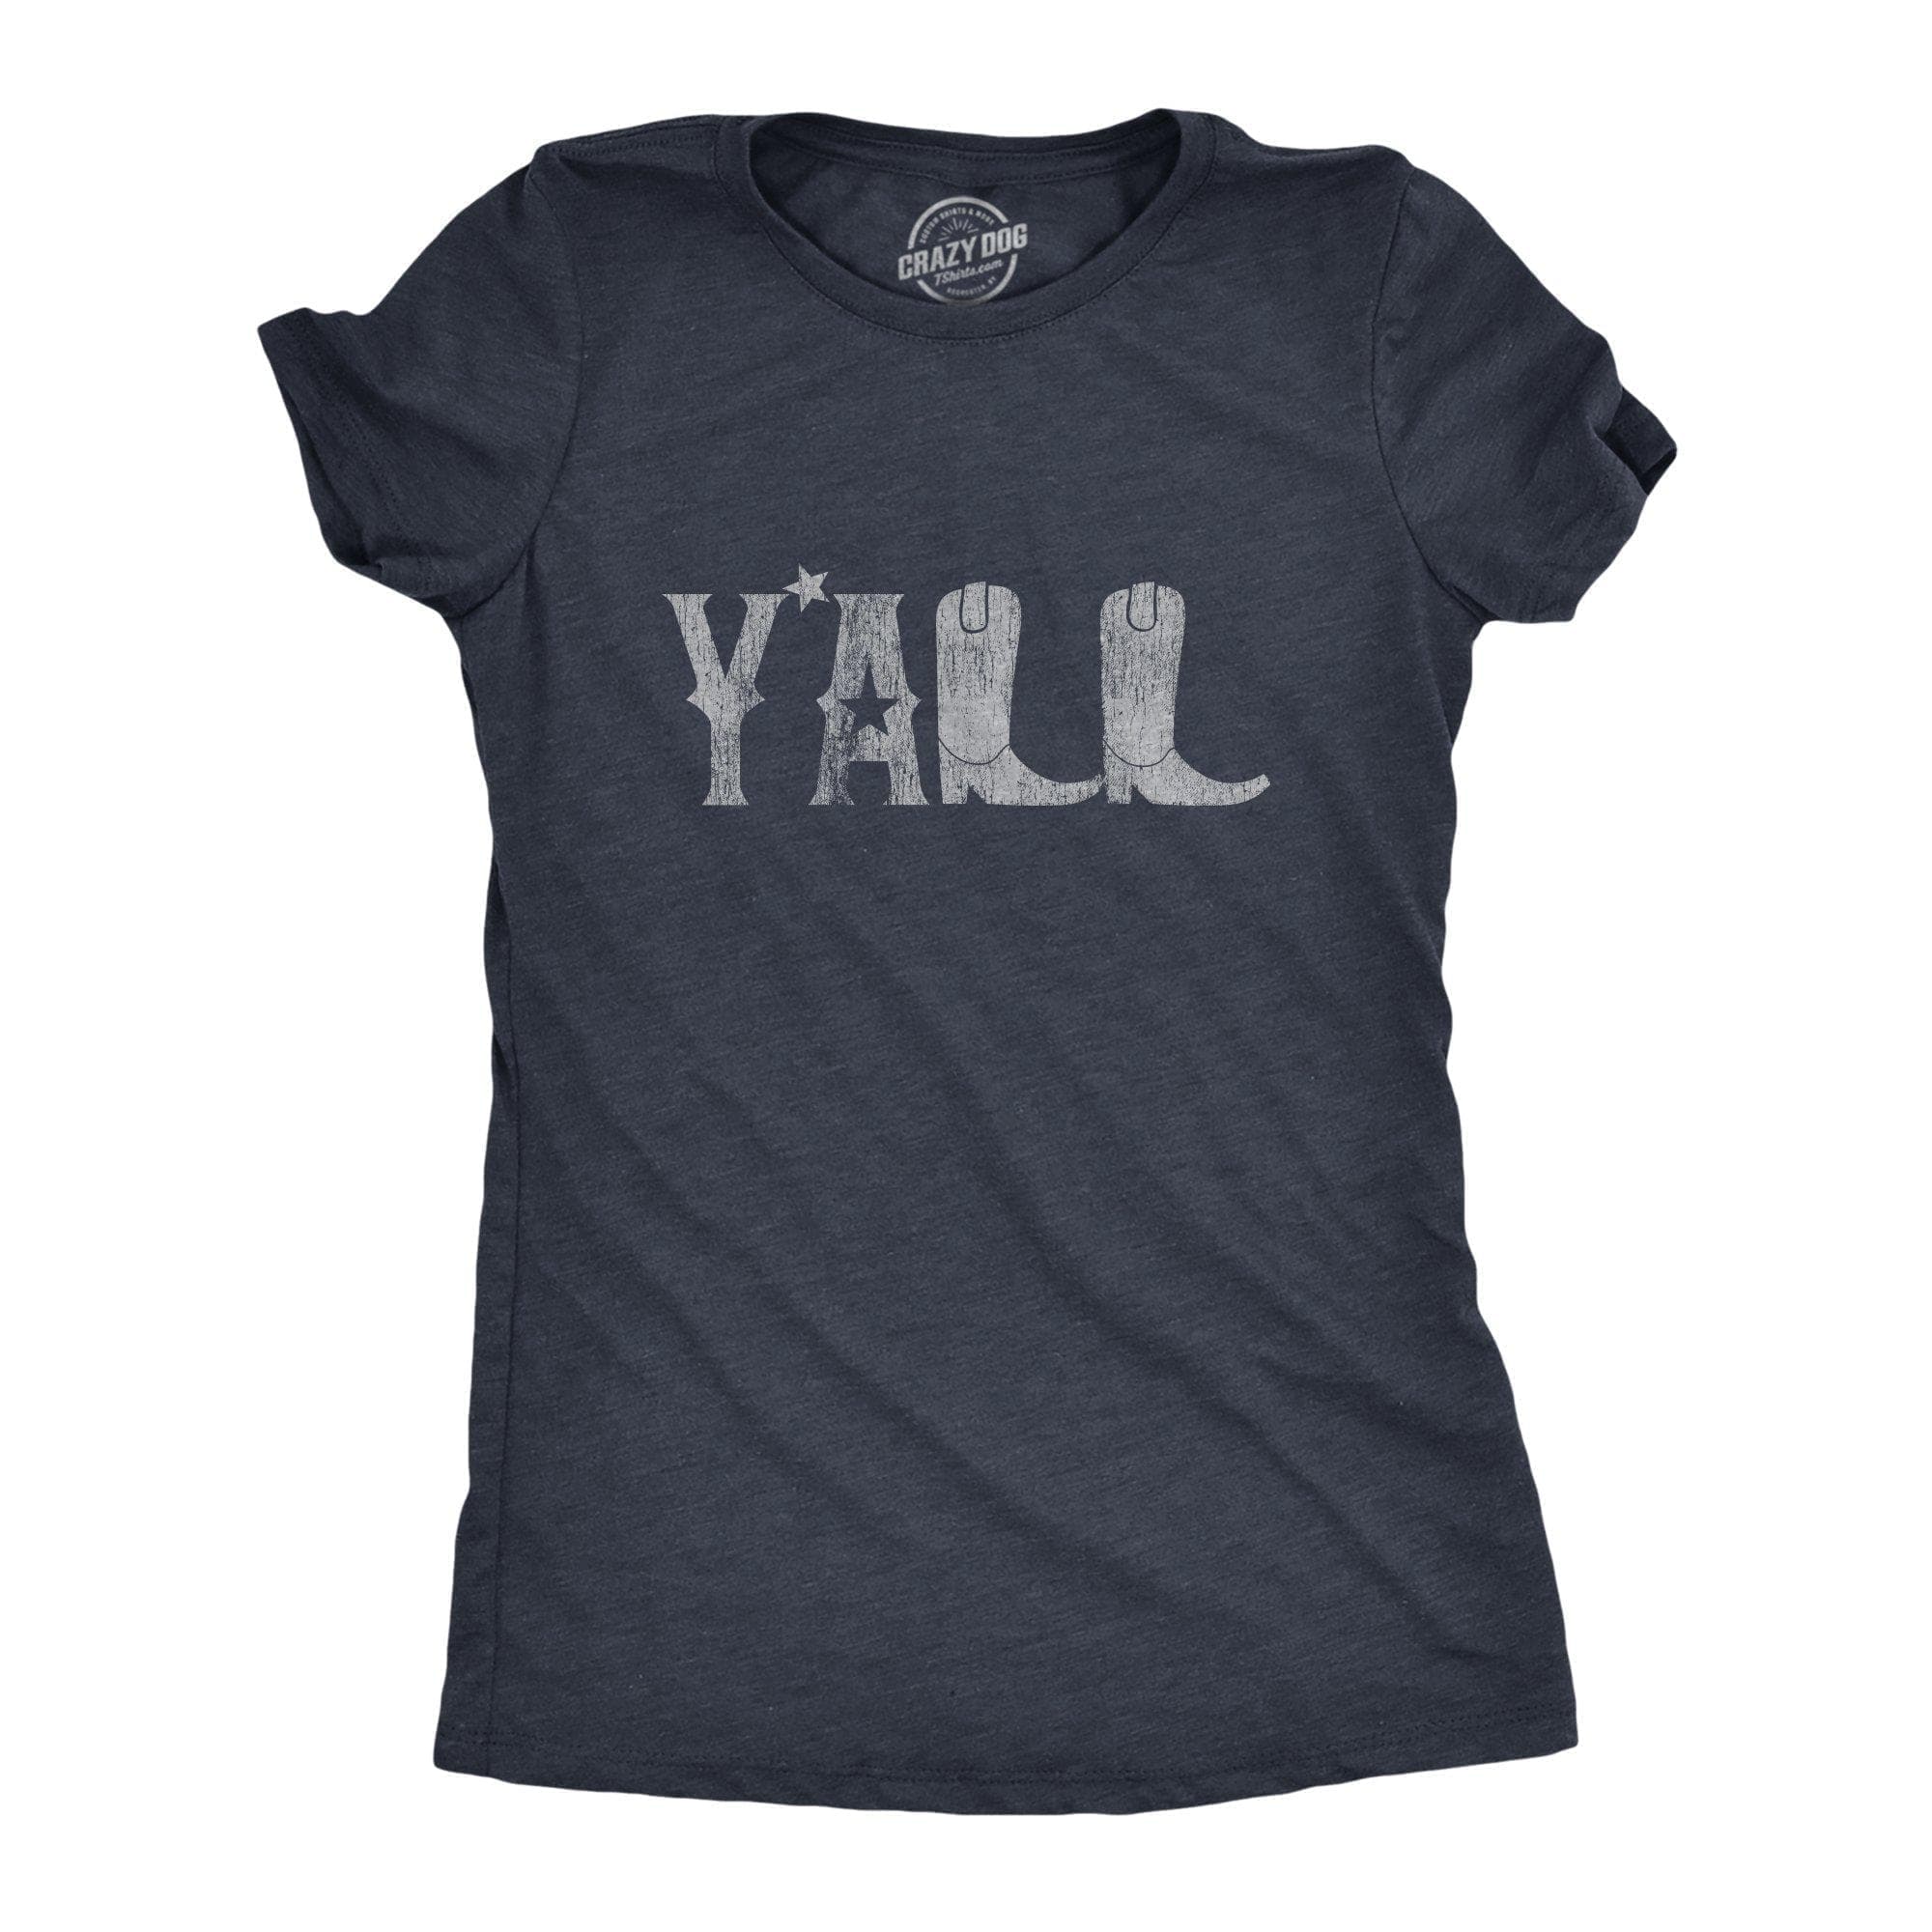 Y'all Boots Women's Tshirt - Crazy Dog T-Shirts